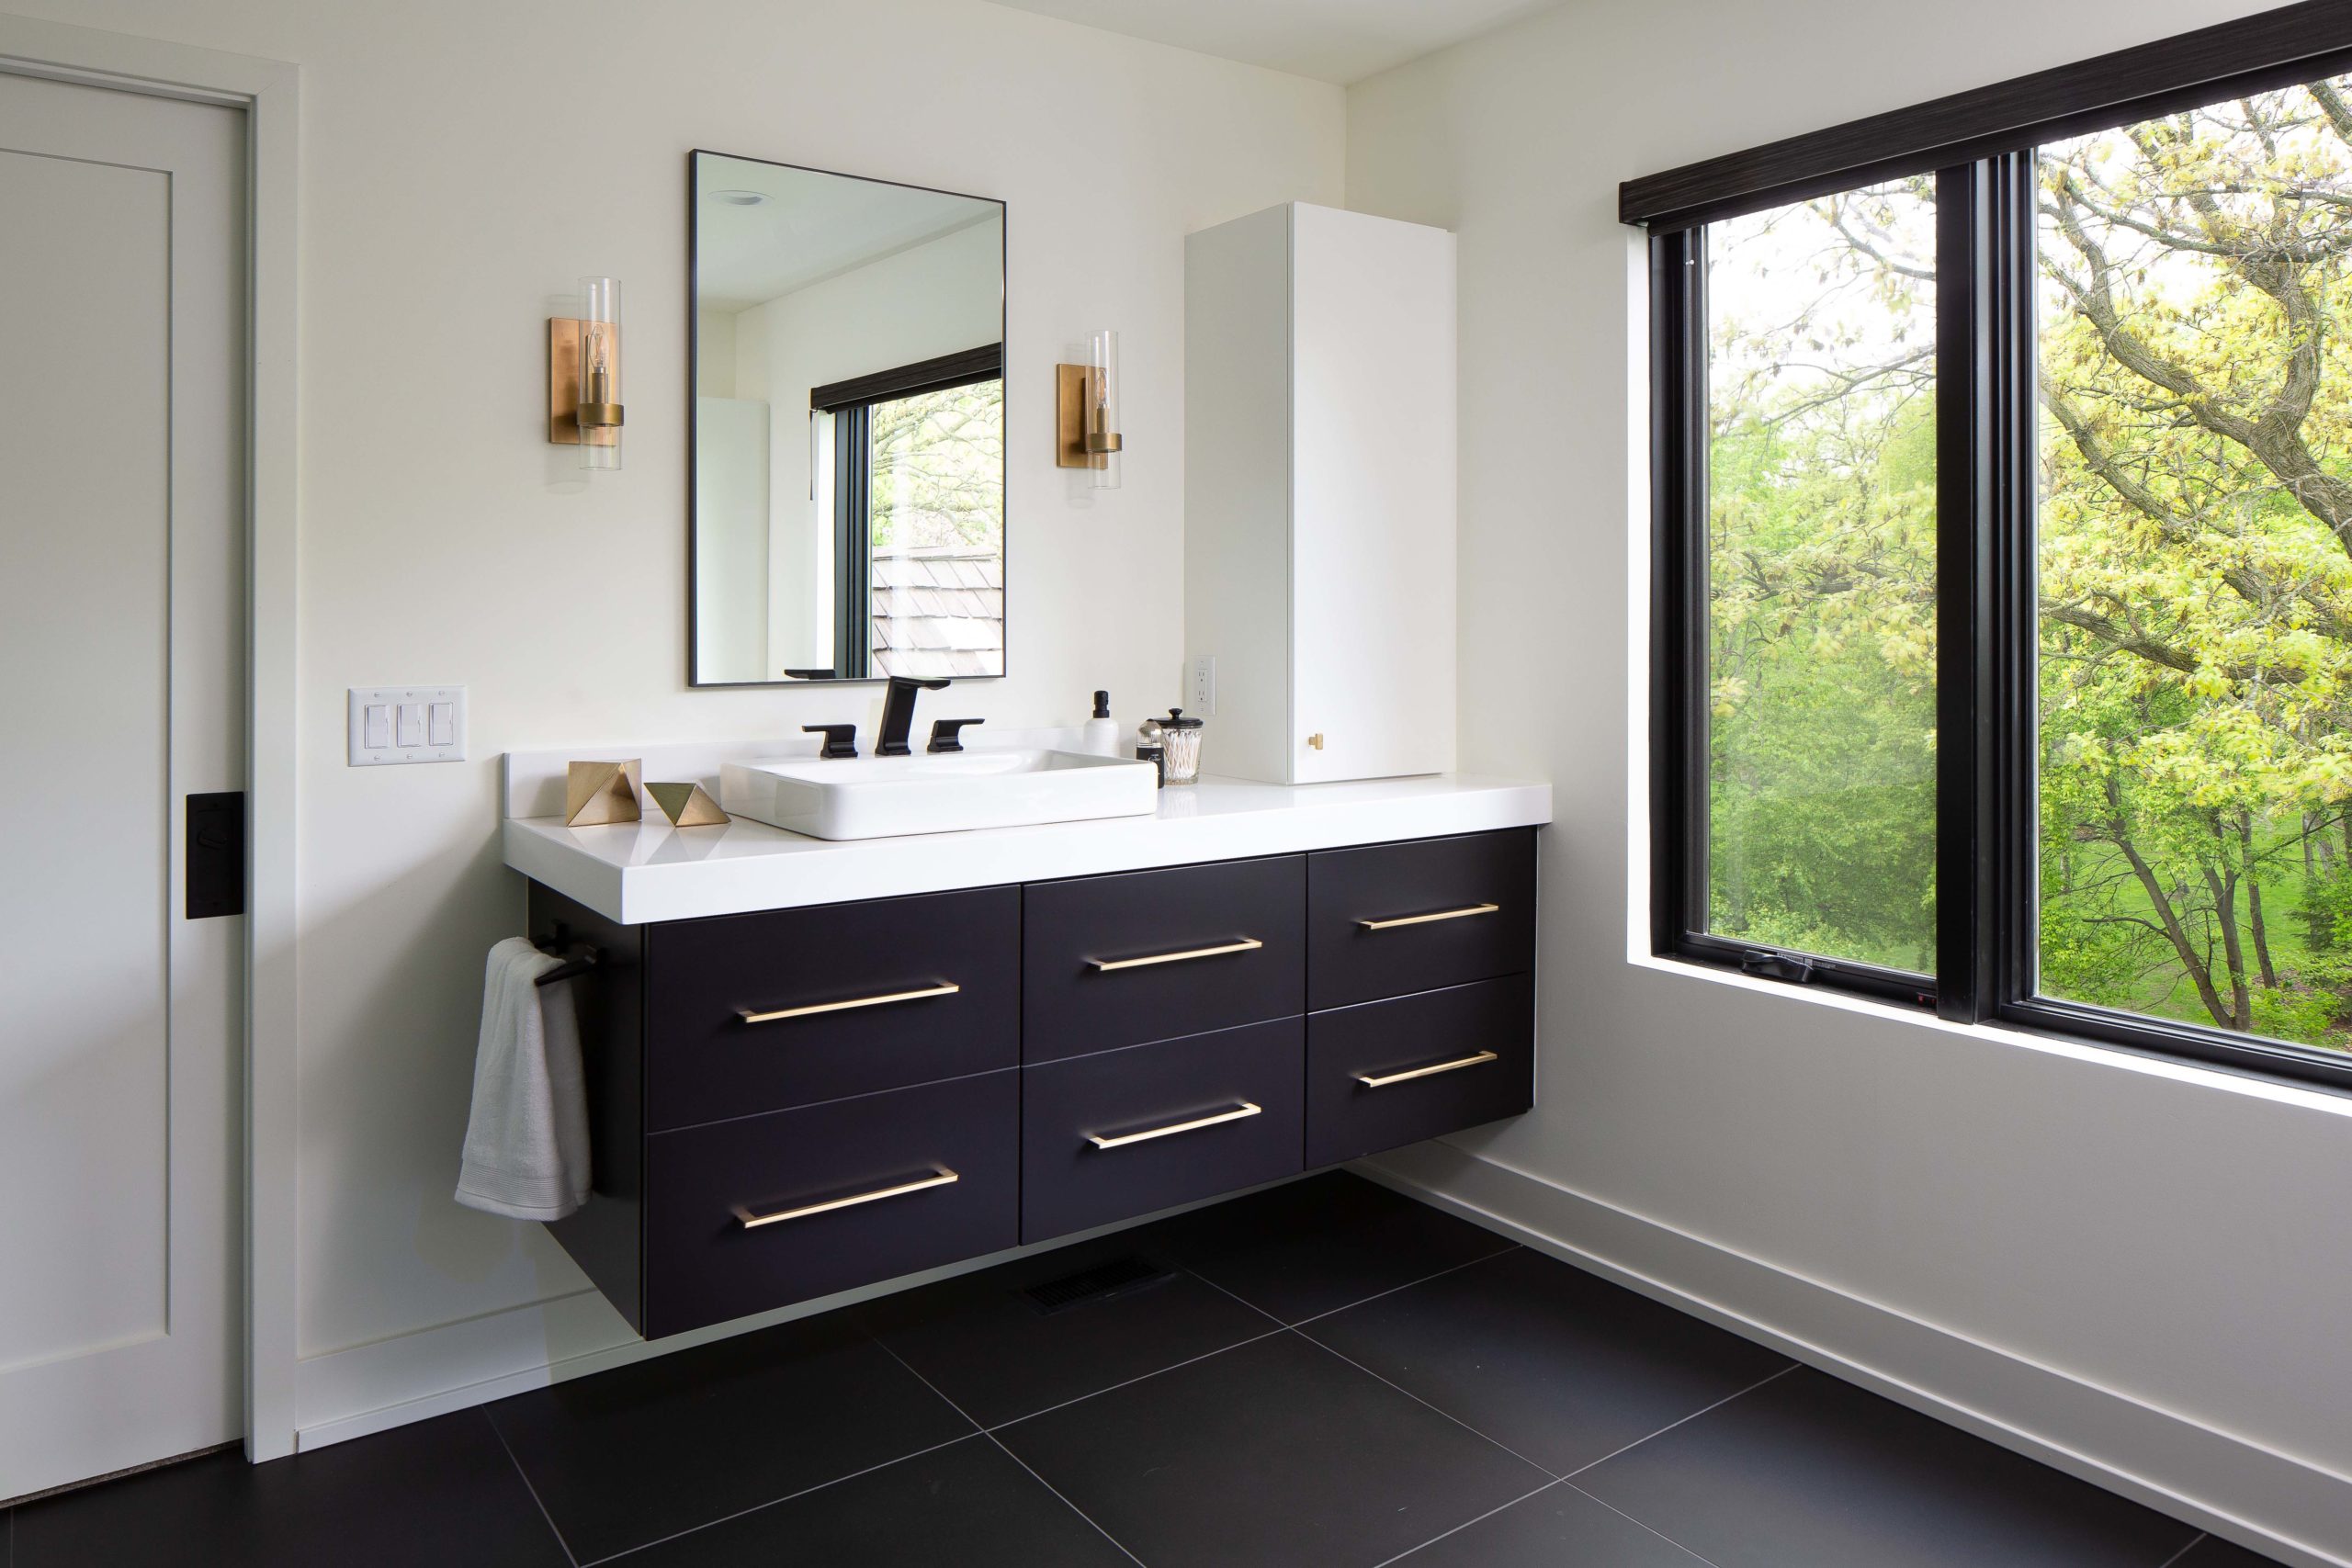 A modern bathroom remodel with black cabinets and a window.